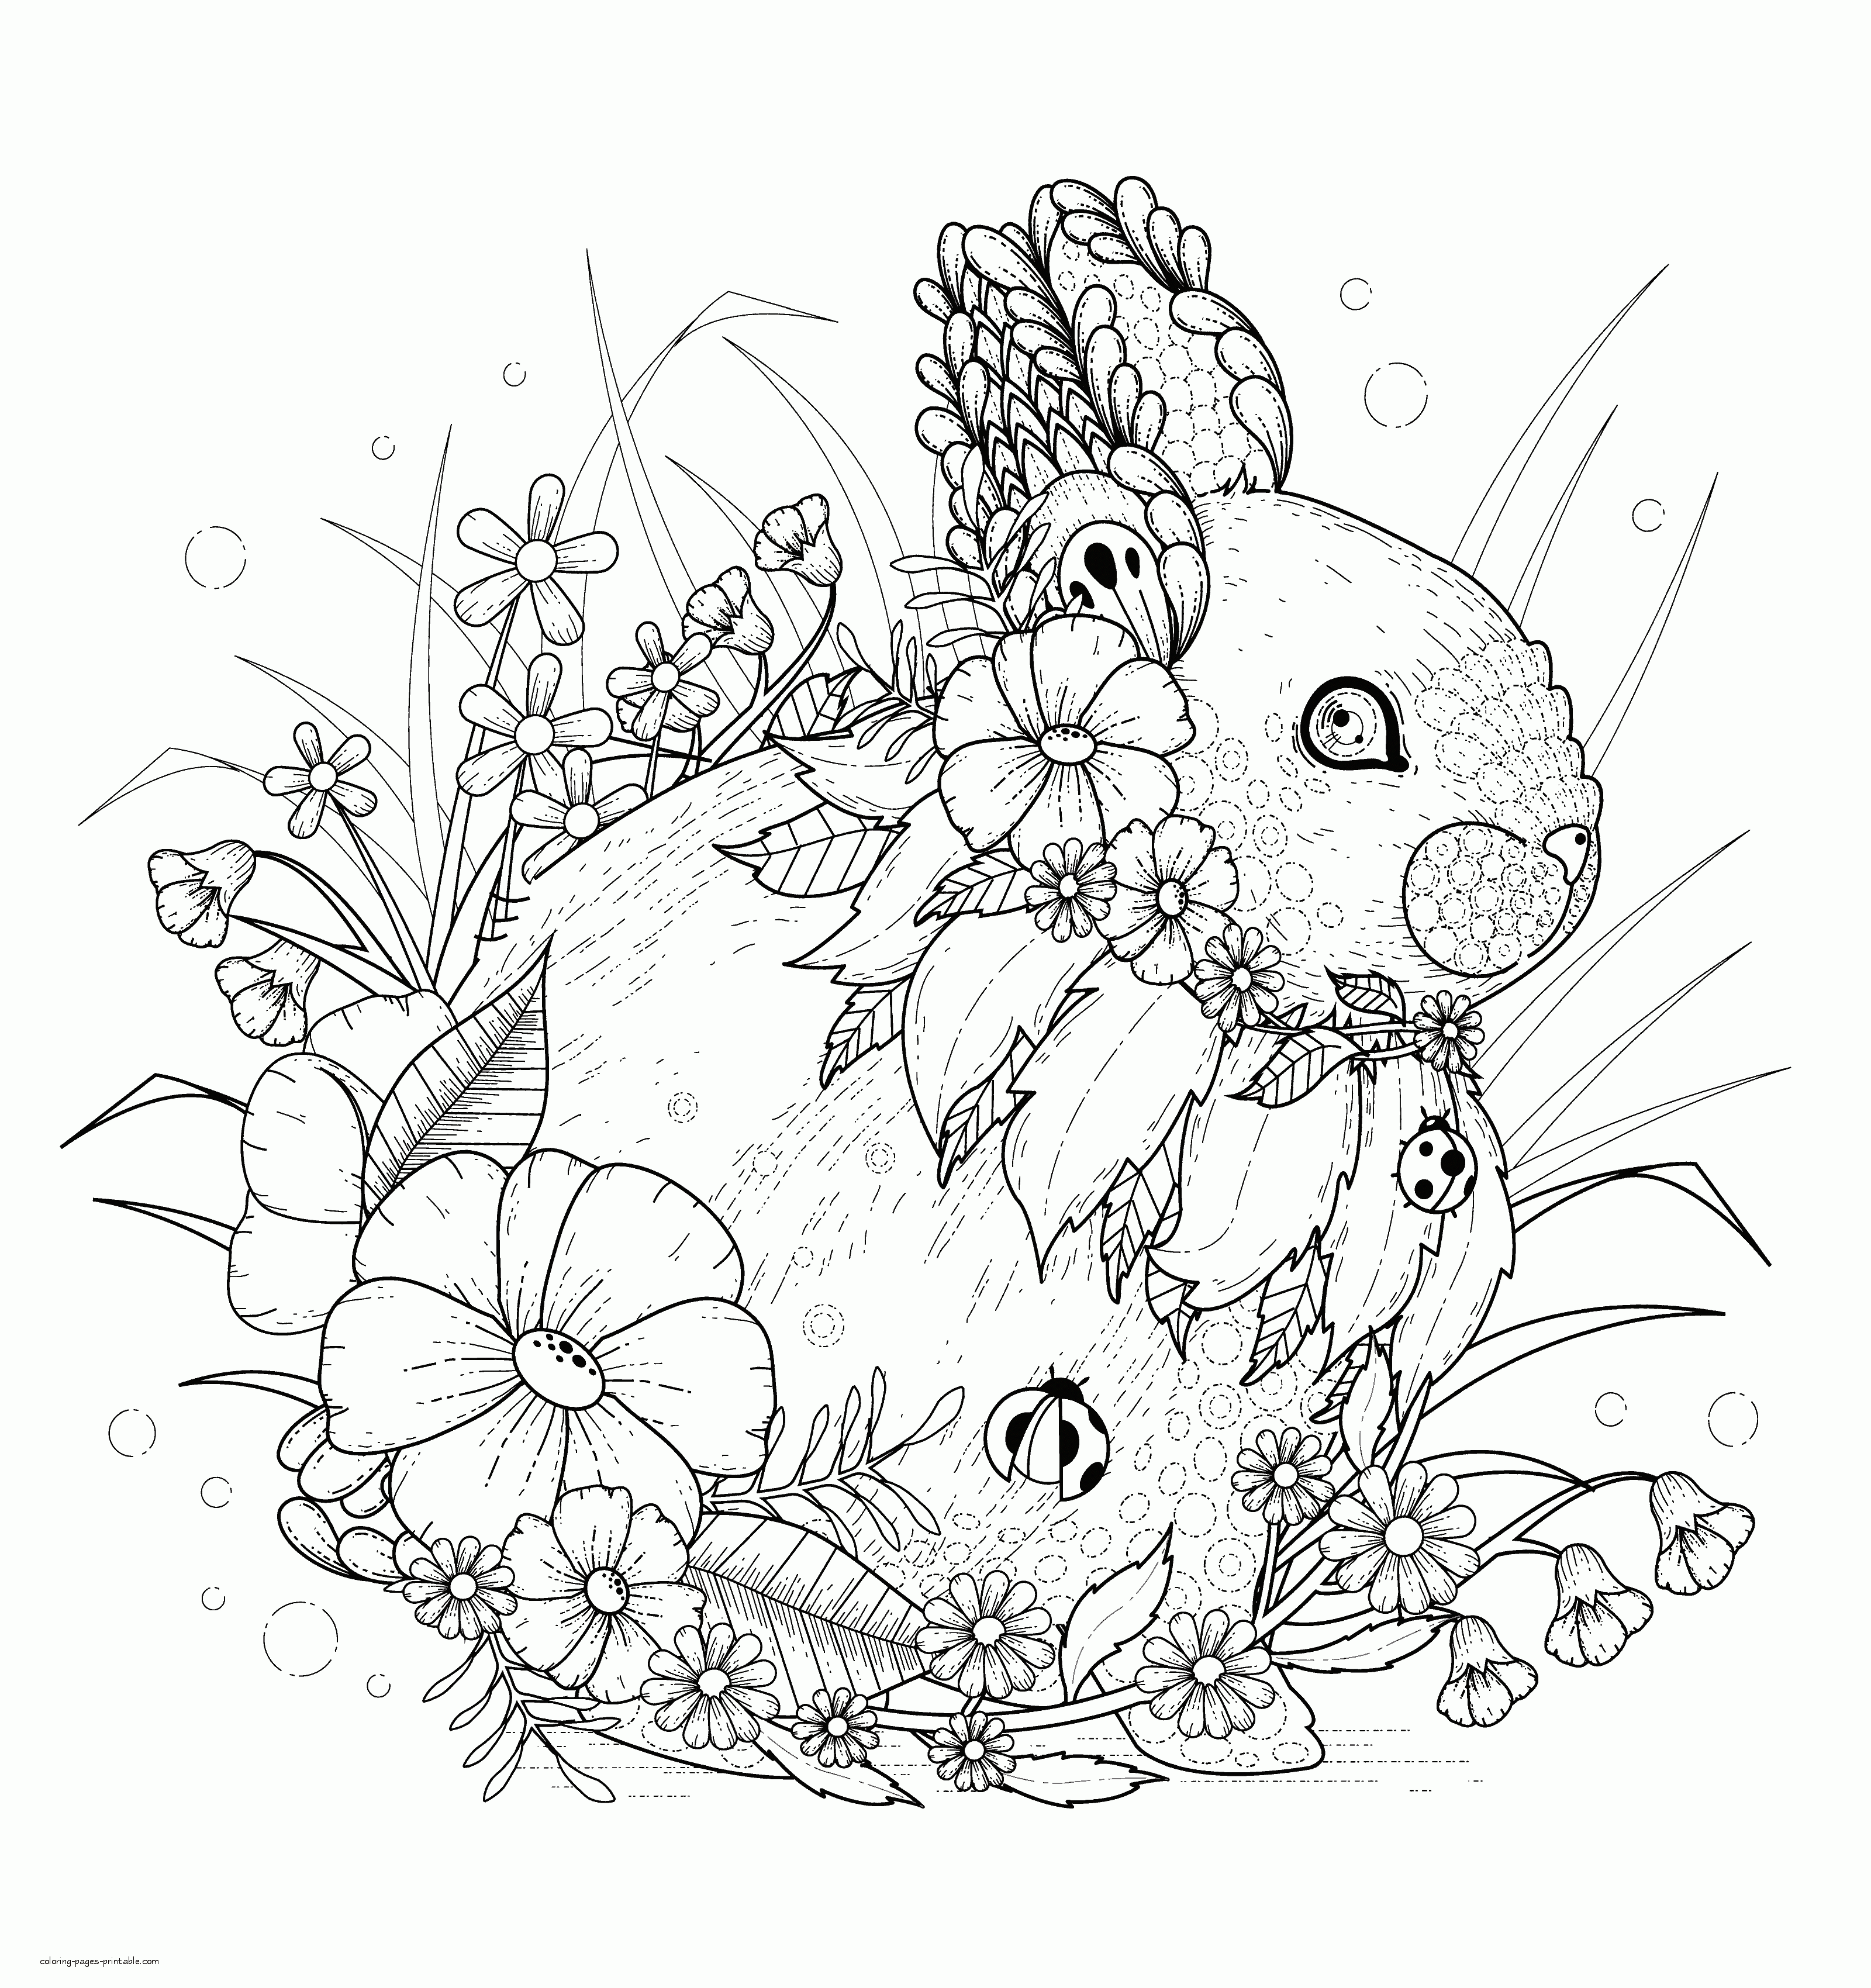 Rabbit Coloring Pages. Adult Animal Book || COLORING-PAGES-PRINTABLE.COM